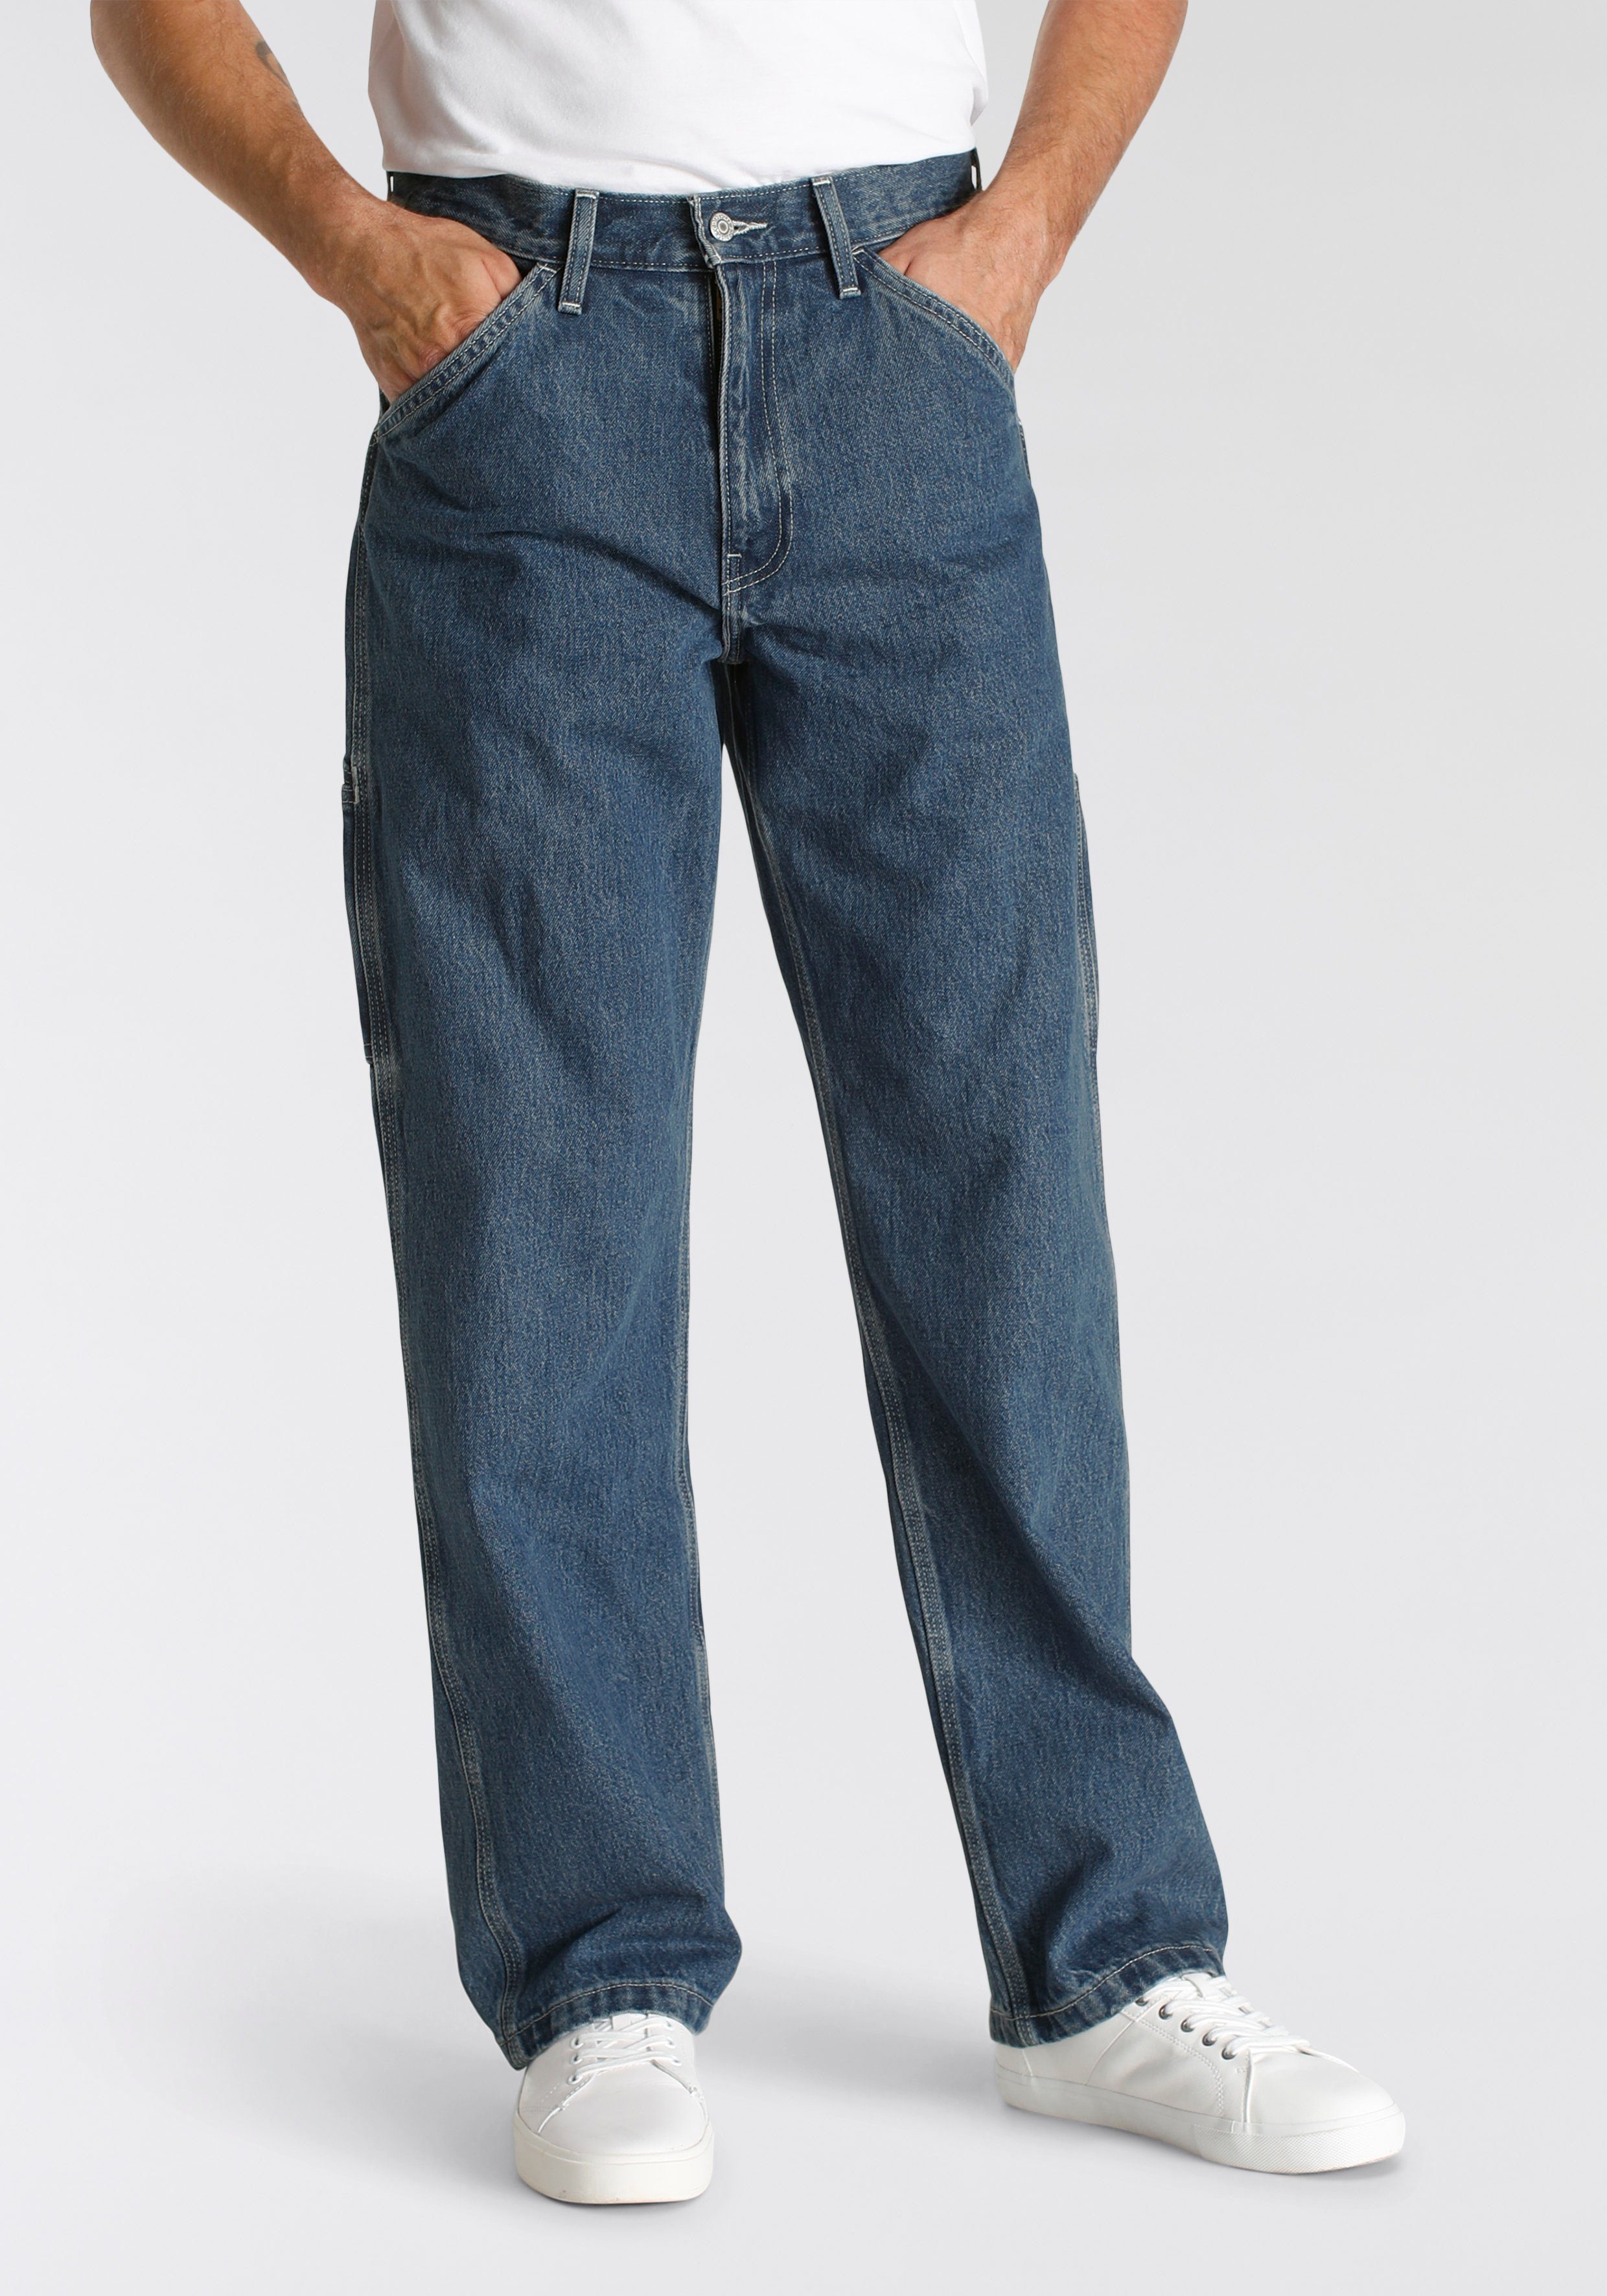 in LOOSE charm STAY Levi's® 568 Cargojeans CARPENTER safe